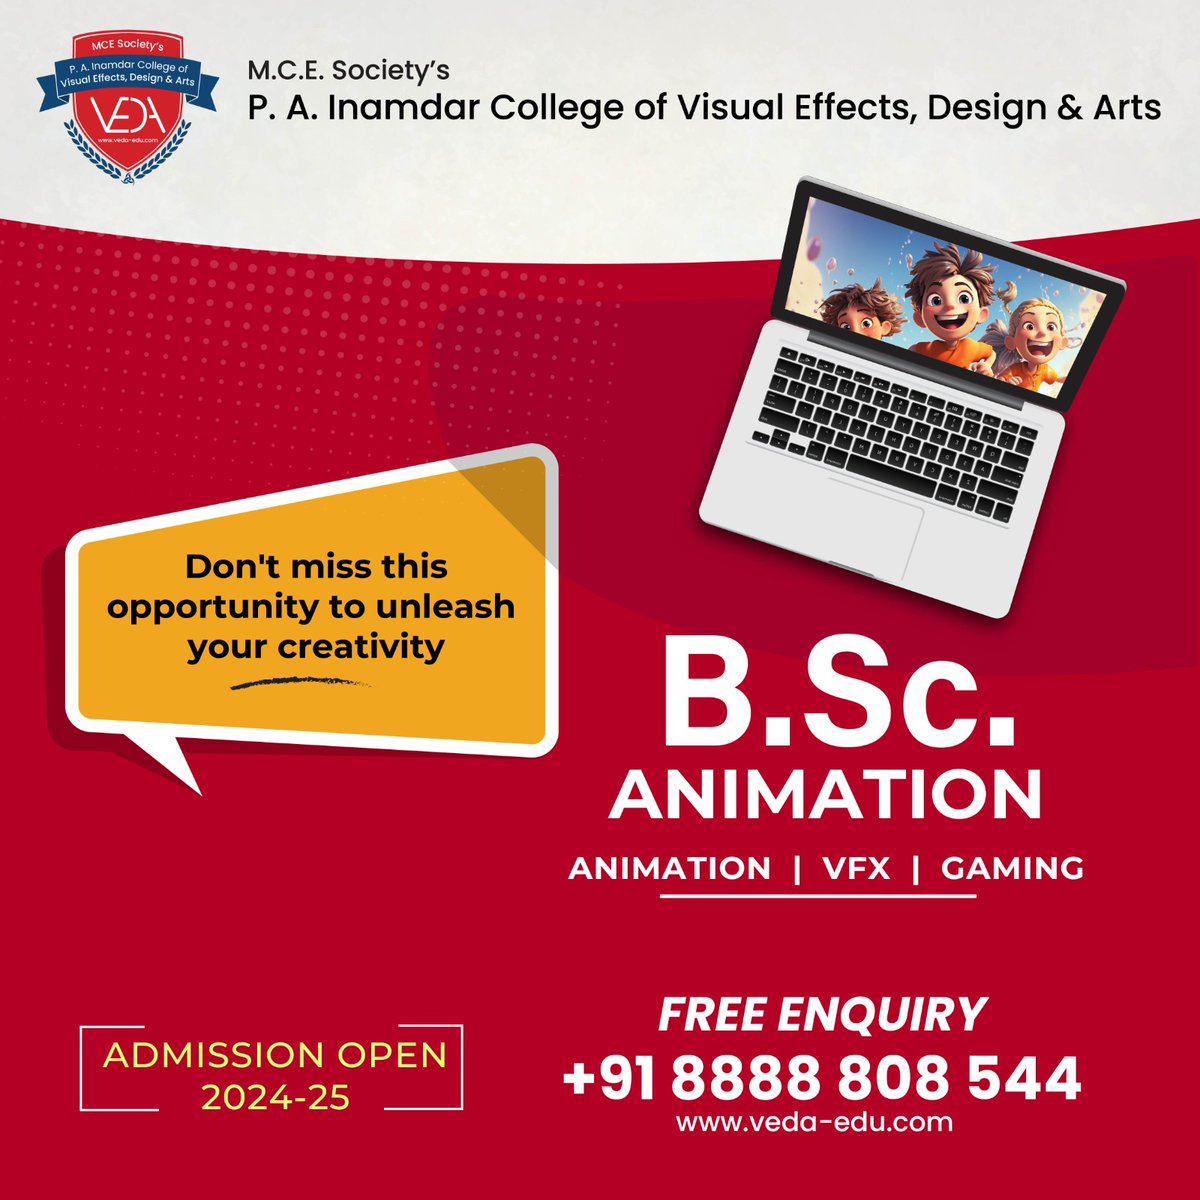 Hurry Up...! Few Seats Left!

For more information get in touch with us on:
📞 : +91 8888808544
🌐 : veda-edu.com
📩 : enquiry@veda-edu.com
#UniversityApproved #Animation #VFX #Gaming #DegreeCourses #DiplomaCourses #certificatecourse #vedacollege #animationcollege